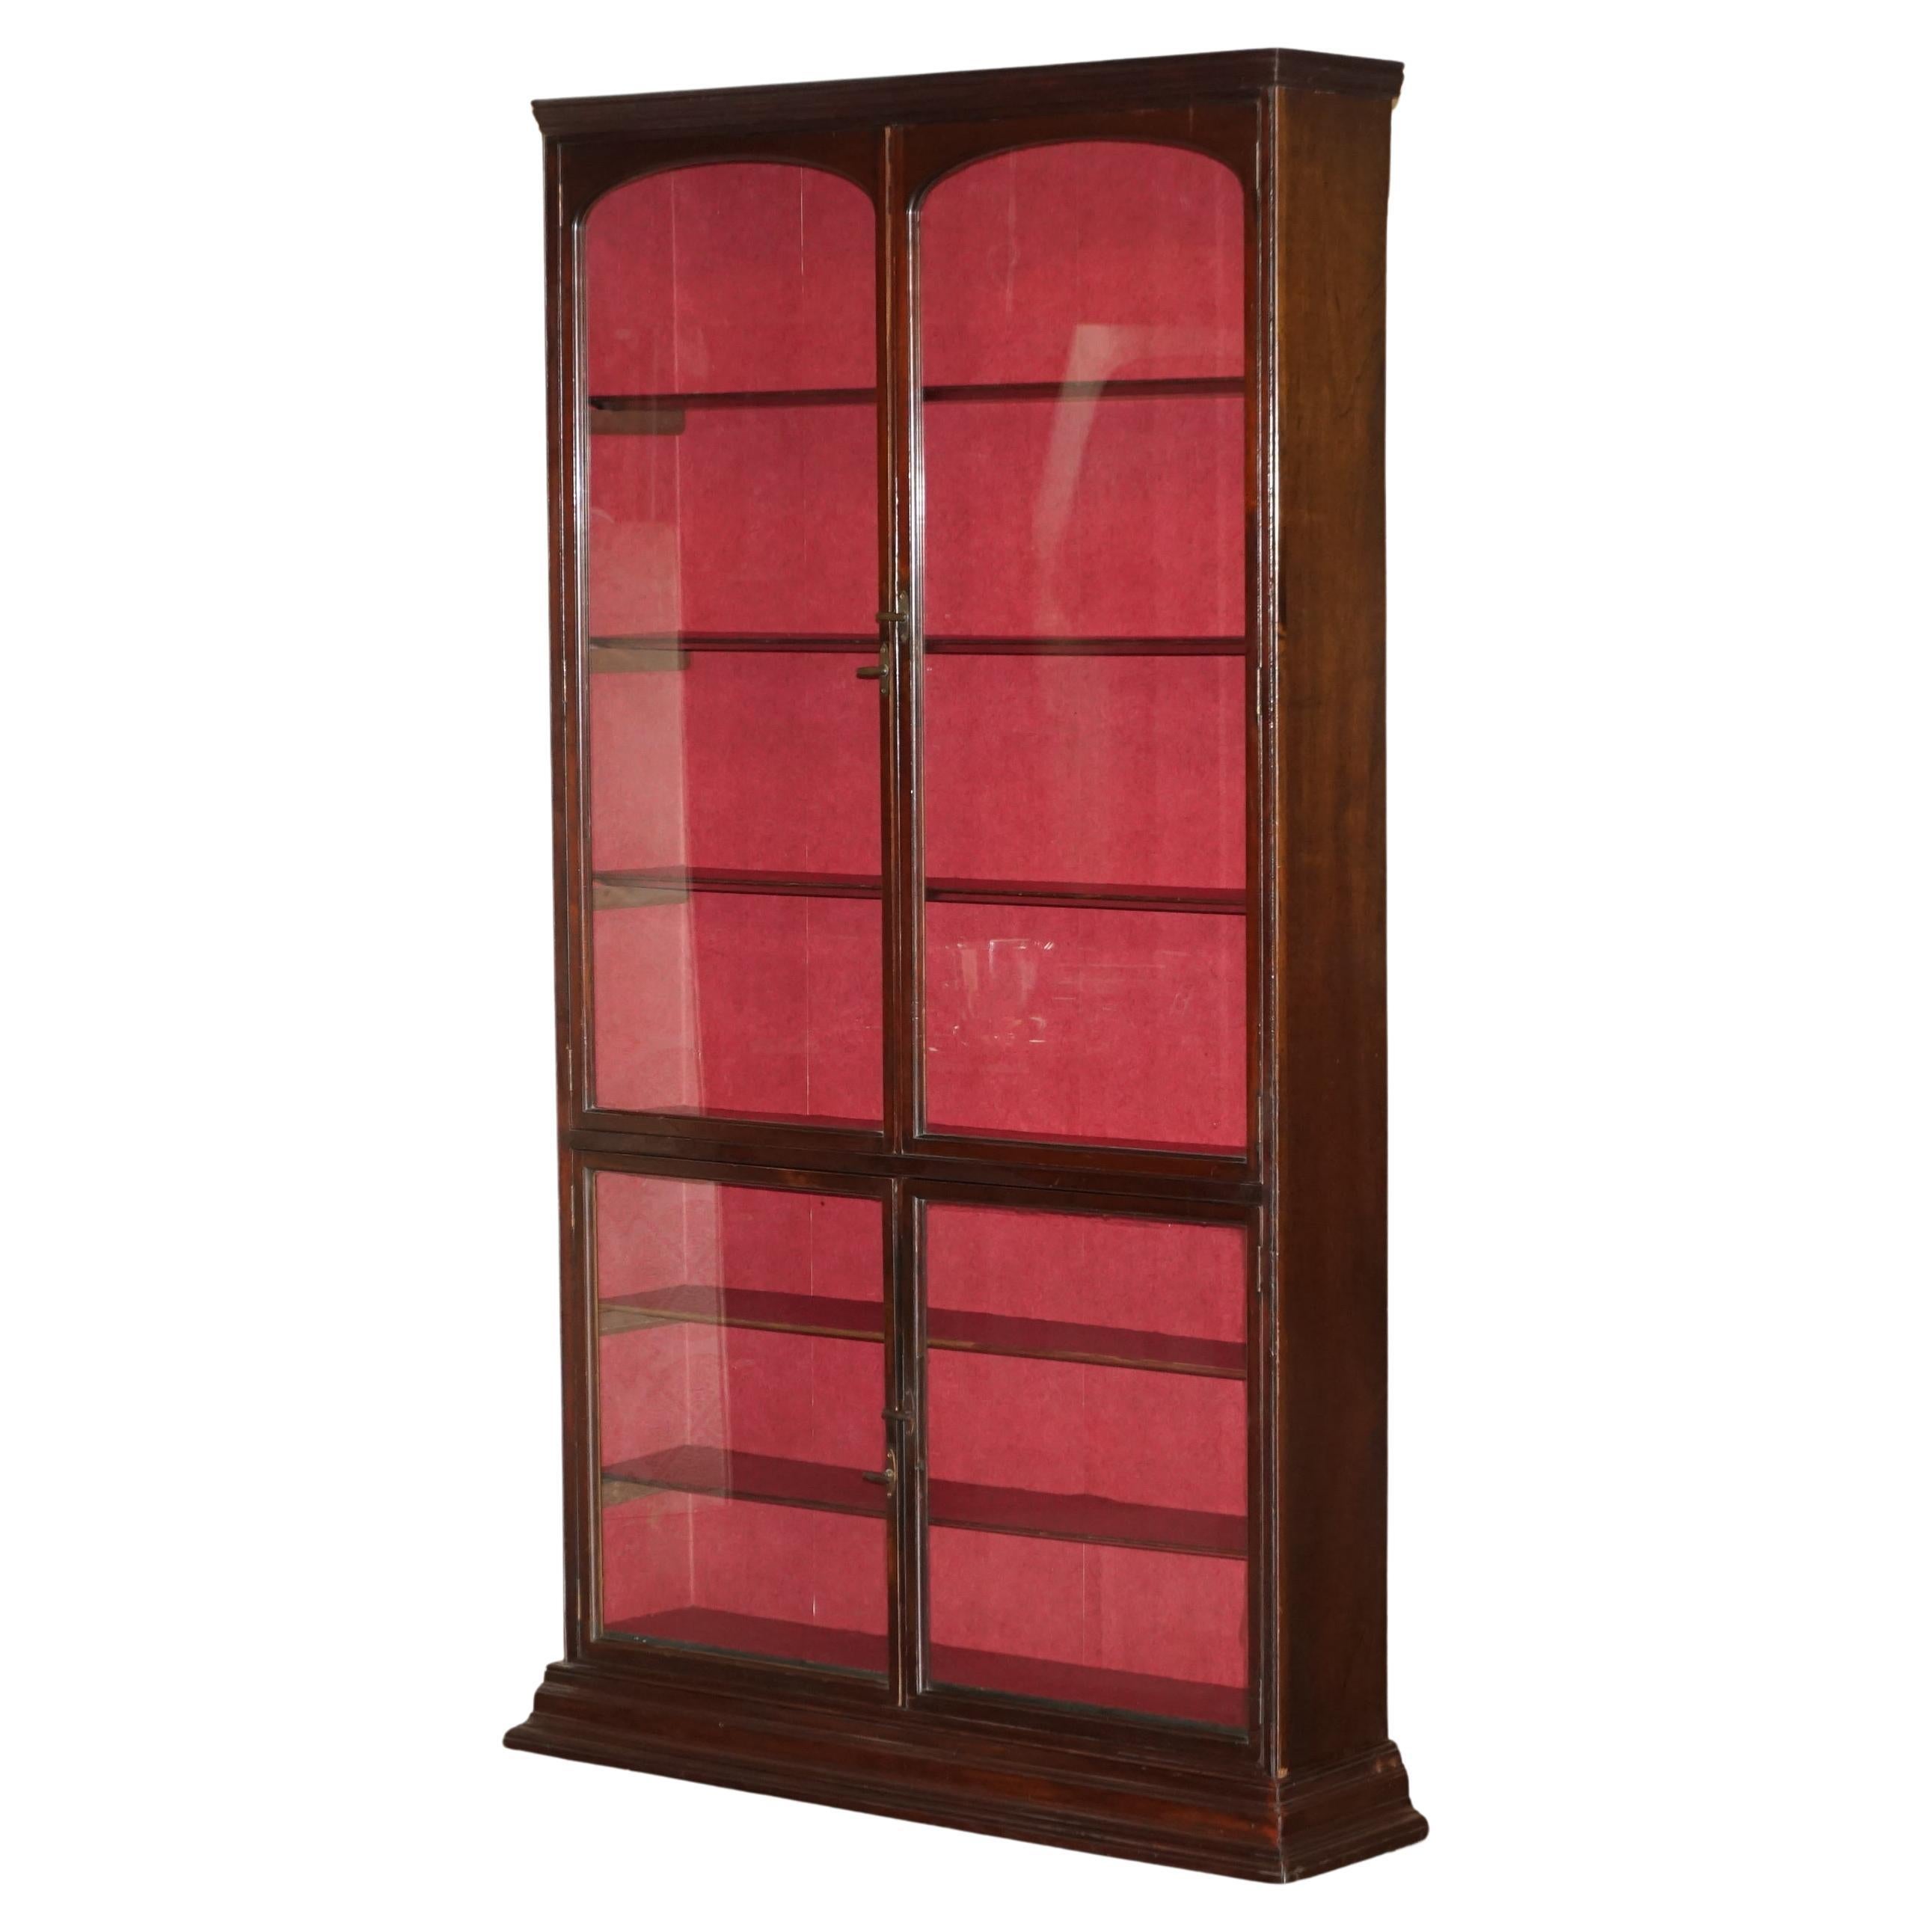 LARGE VICTORIAN HABERDASHERY APOTHECARY SHOPS CABiNET GLAZED DOOR BOOKCASE For Sale